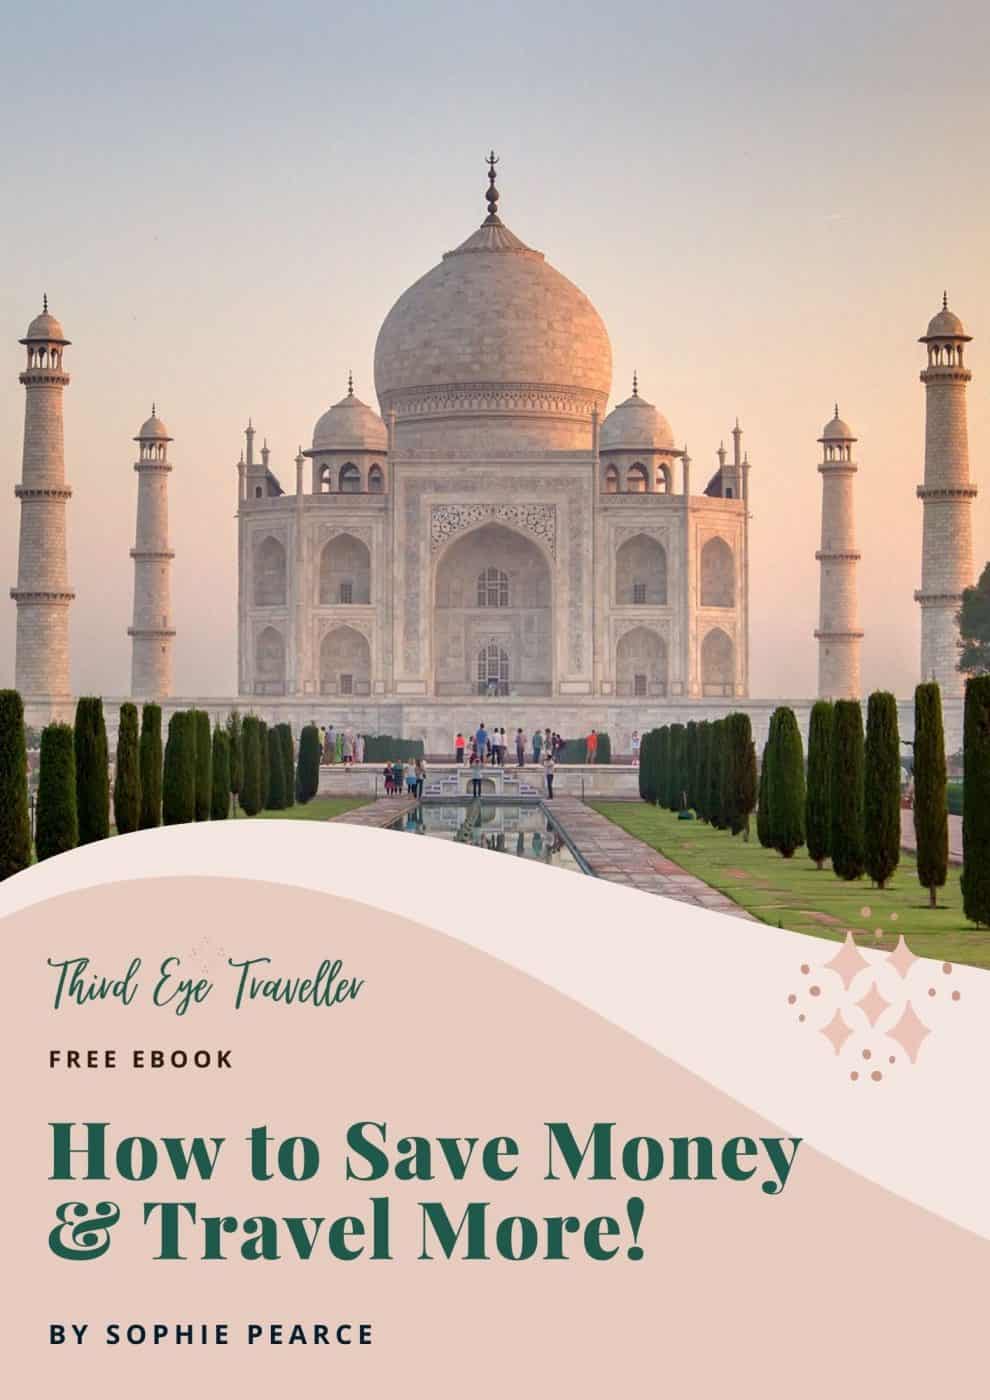 Free eBook How to Save Money Travel More by Sophie Pearce